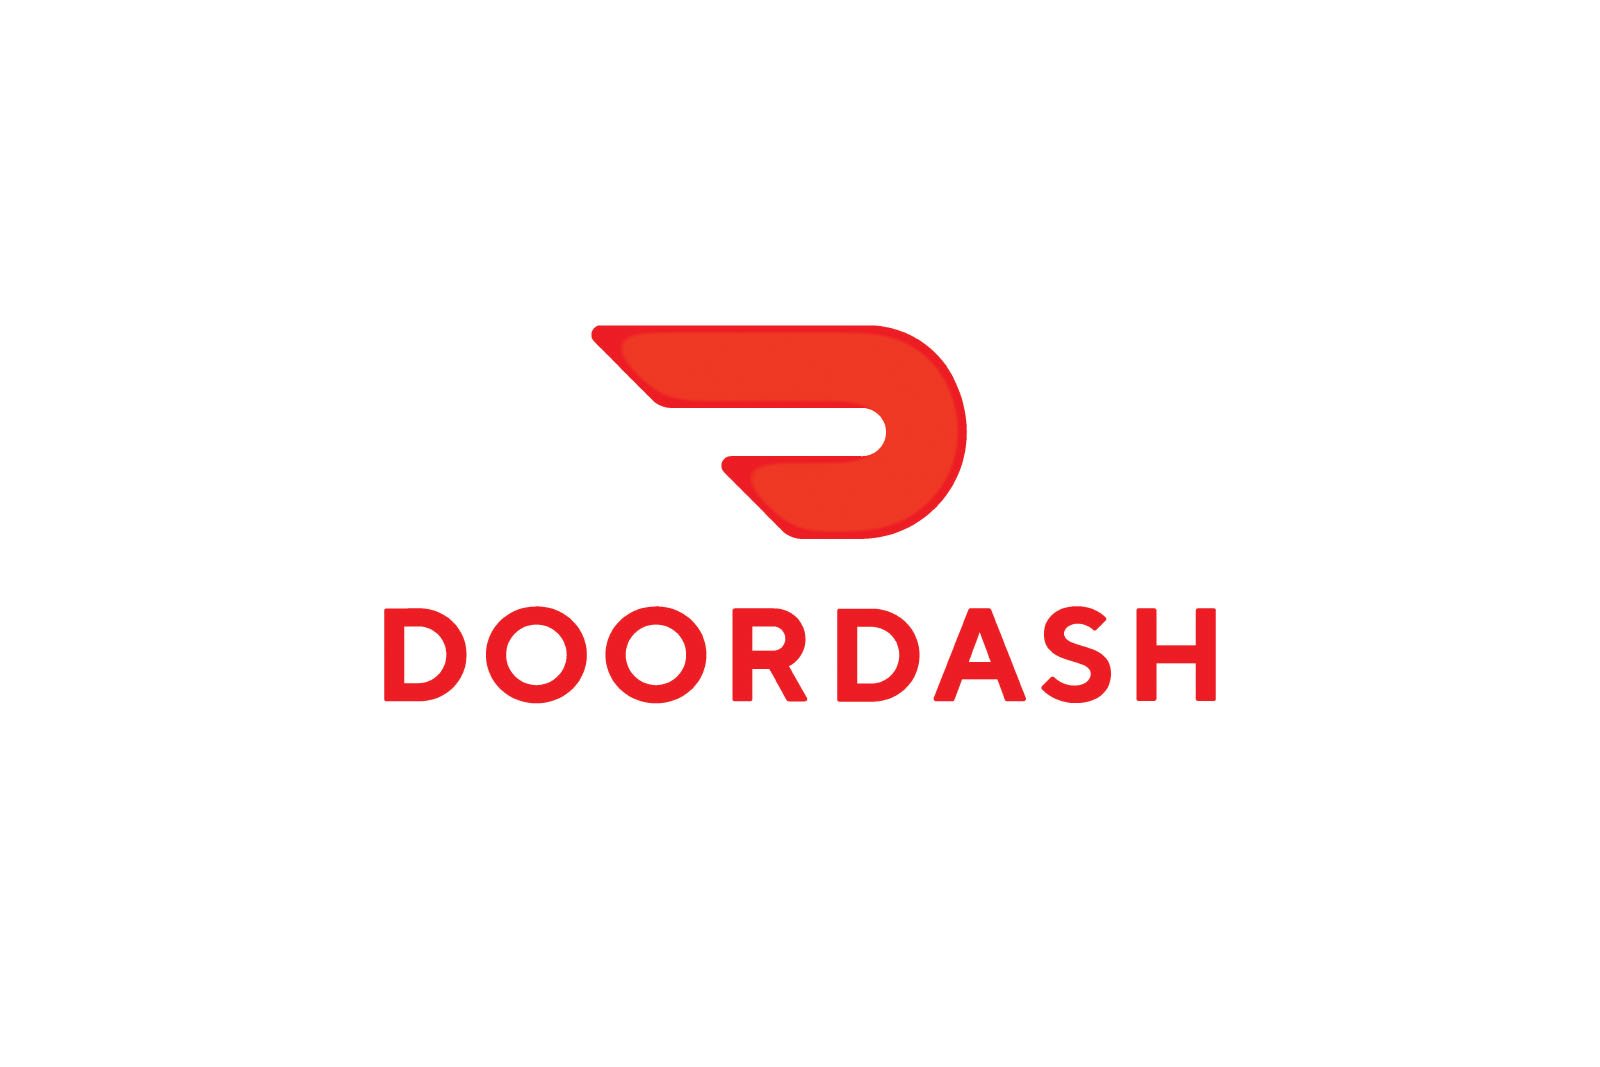 How to Change Starting Point on Doordash